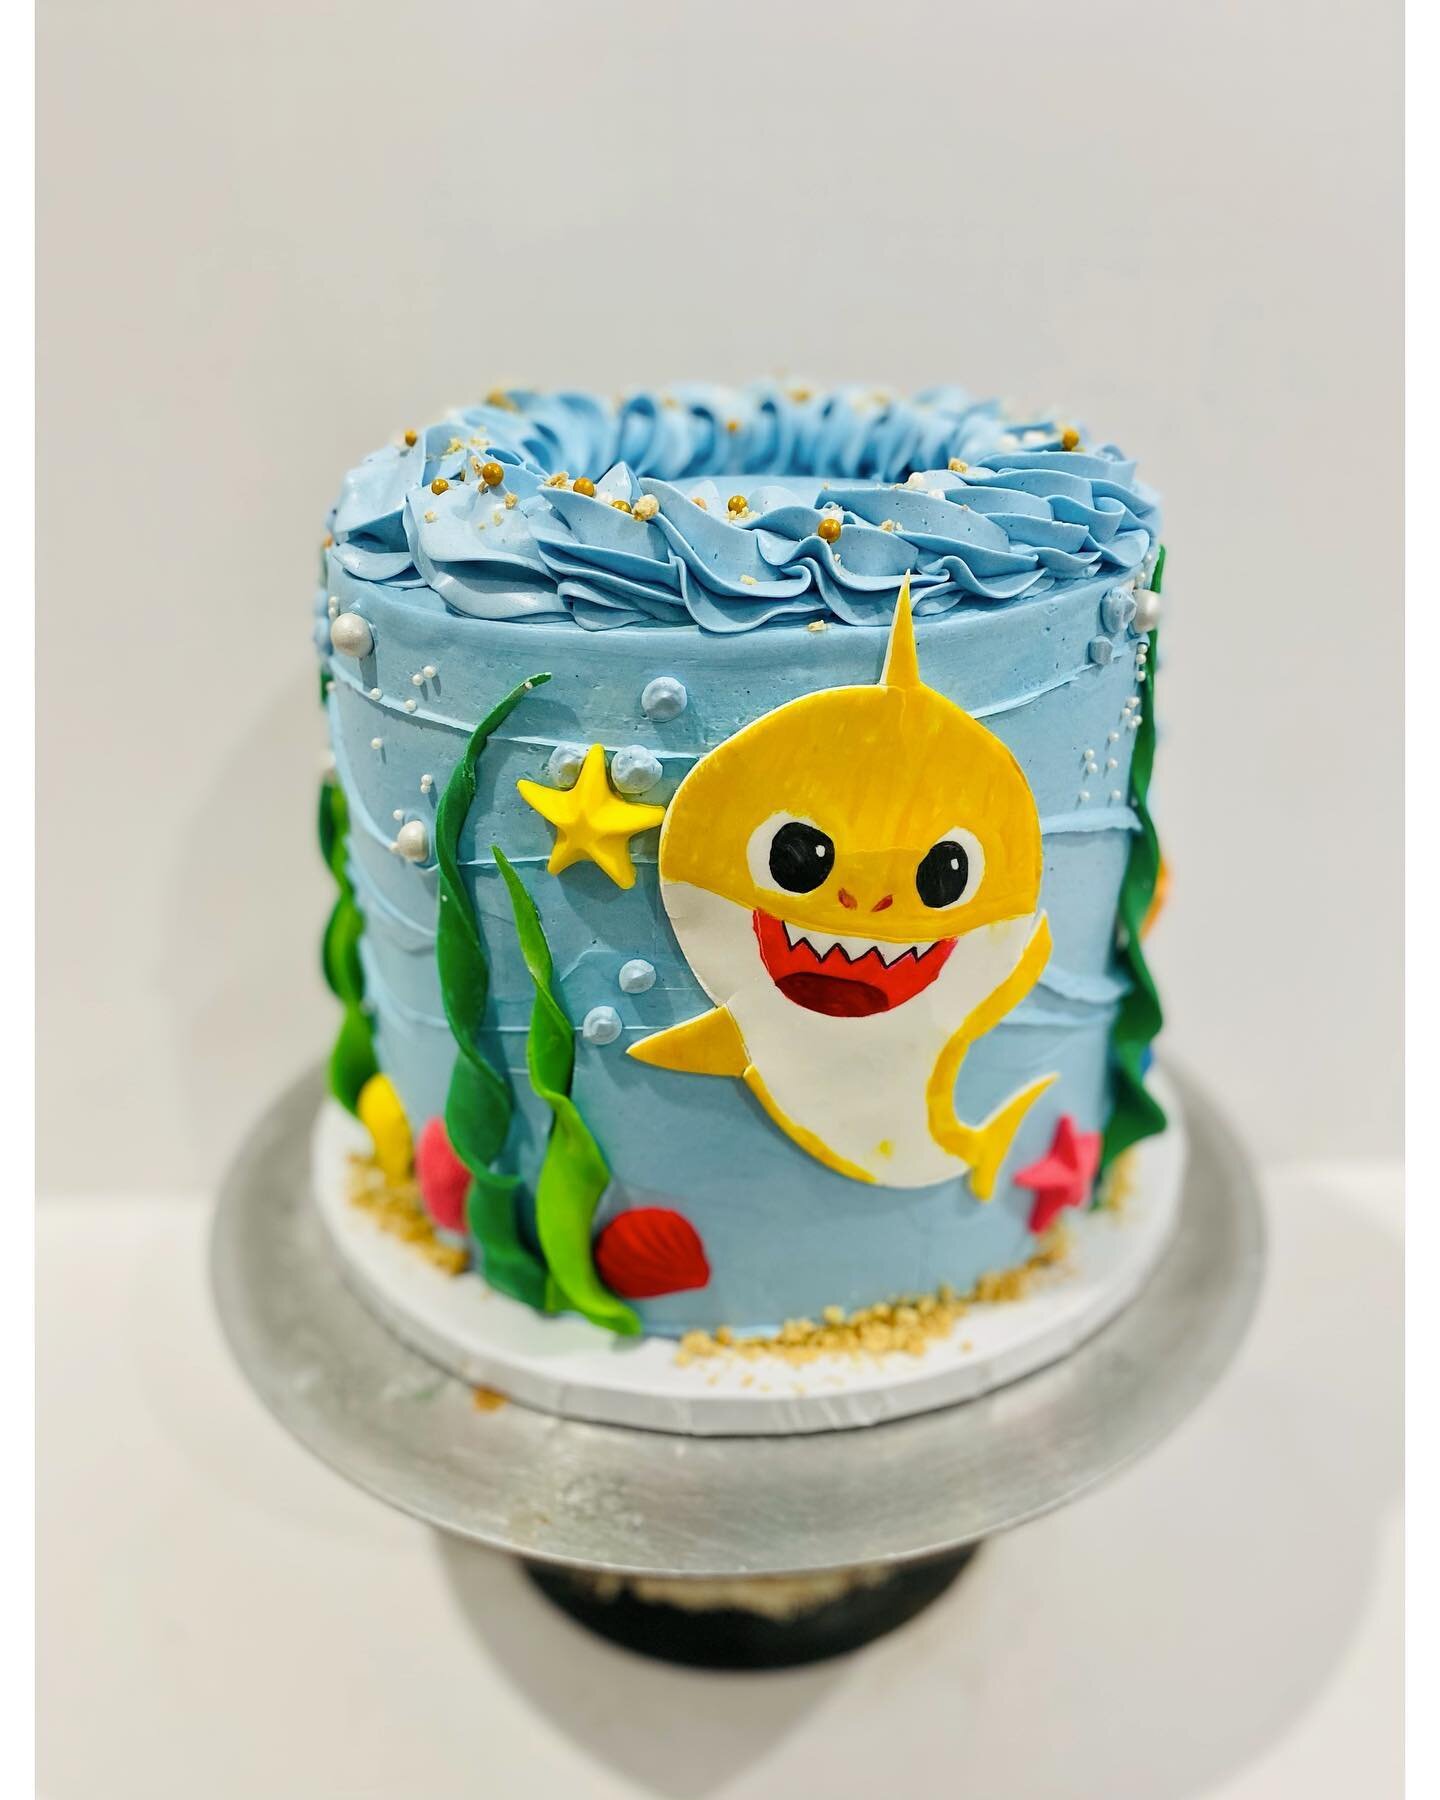 Baby Shark Doo Doo Doo for a little one&rsquo;s 1st birthday 💛 buttercream cake with fondant details and pearl sprinkles 
.
.
.
.
.
.
.
.
#babysharkcake #firstbirthday #babyshark #satinicefondant #oceanthemecake #cakesofinstagram #cakestagram #caked